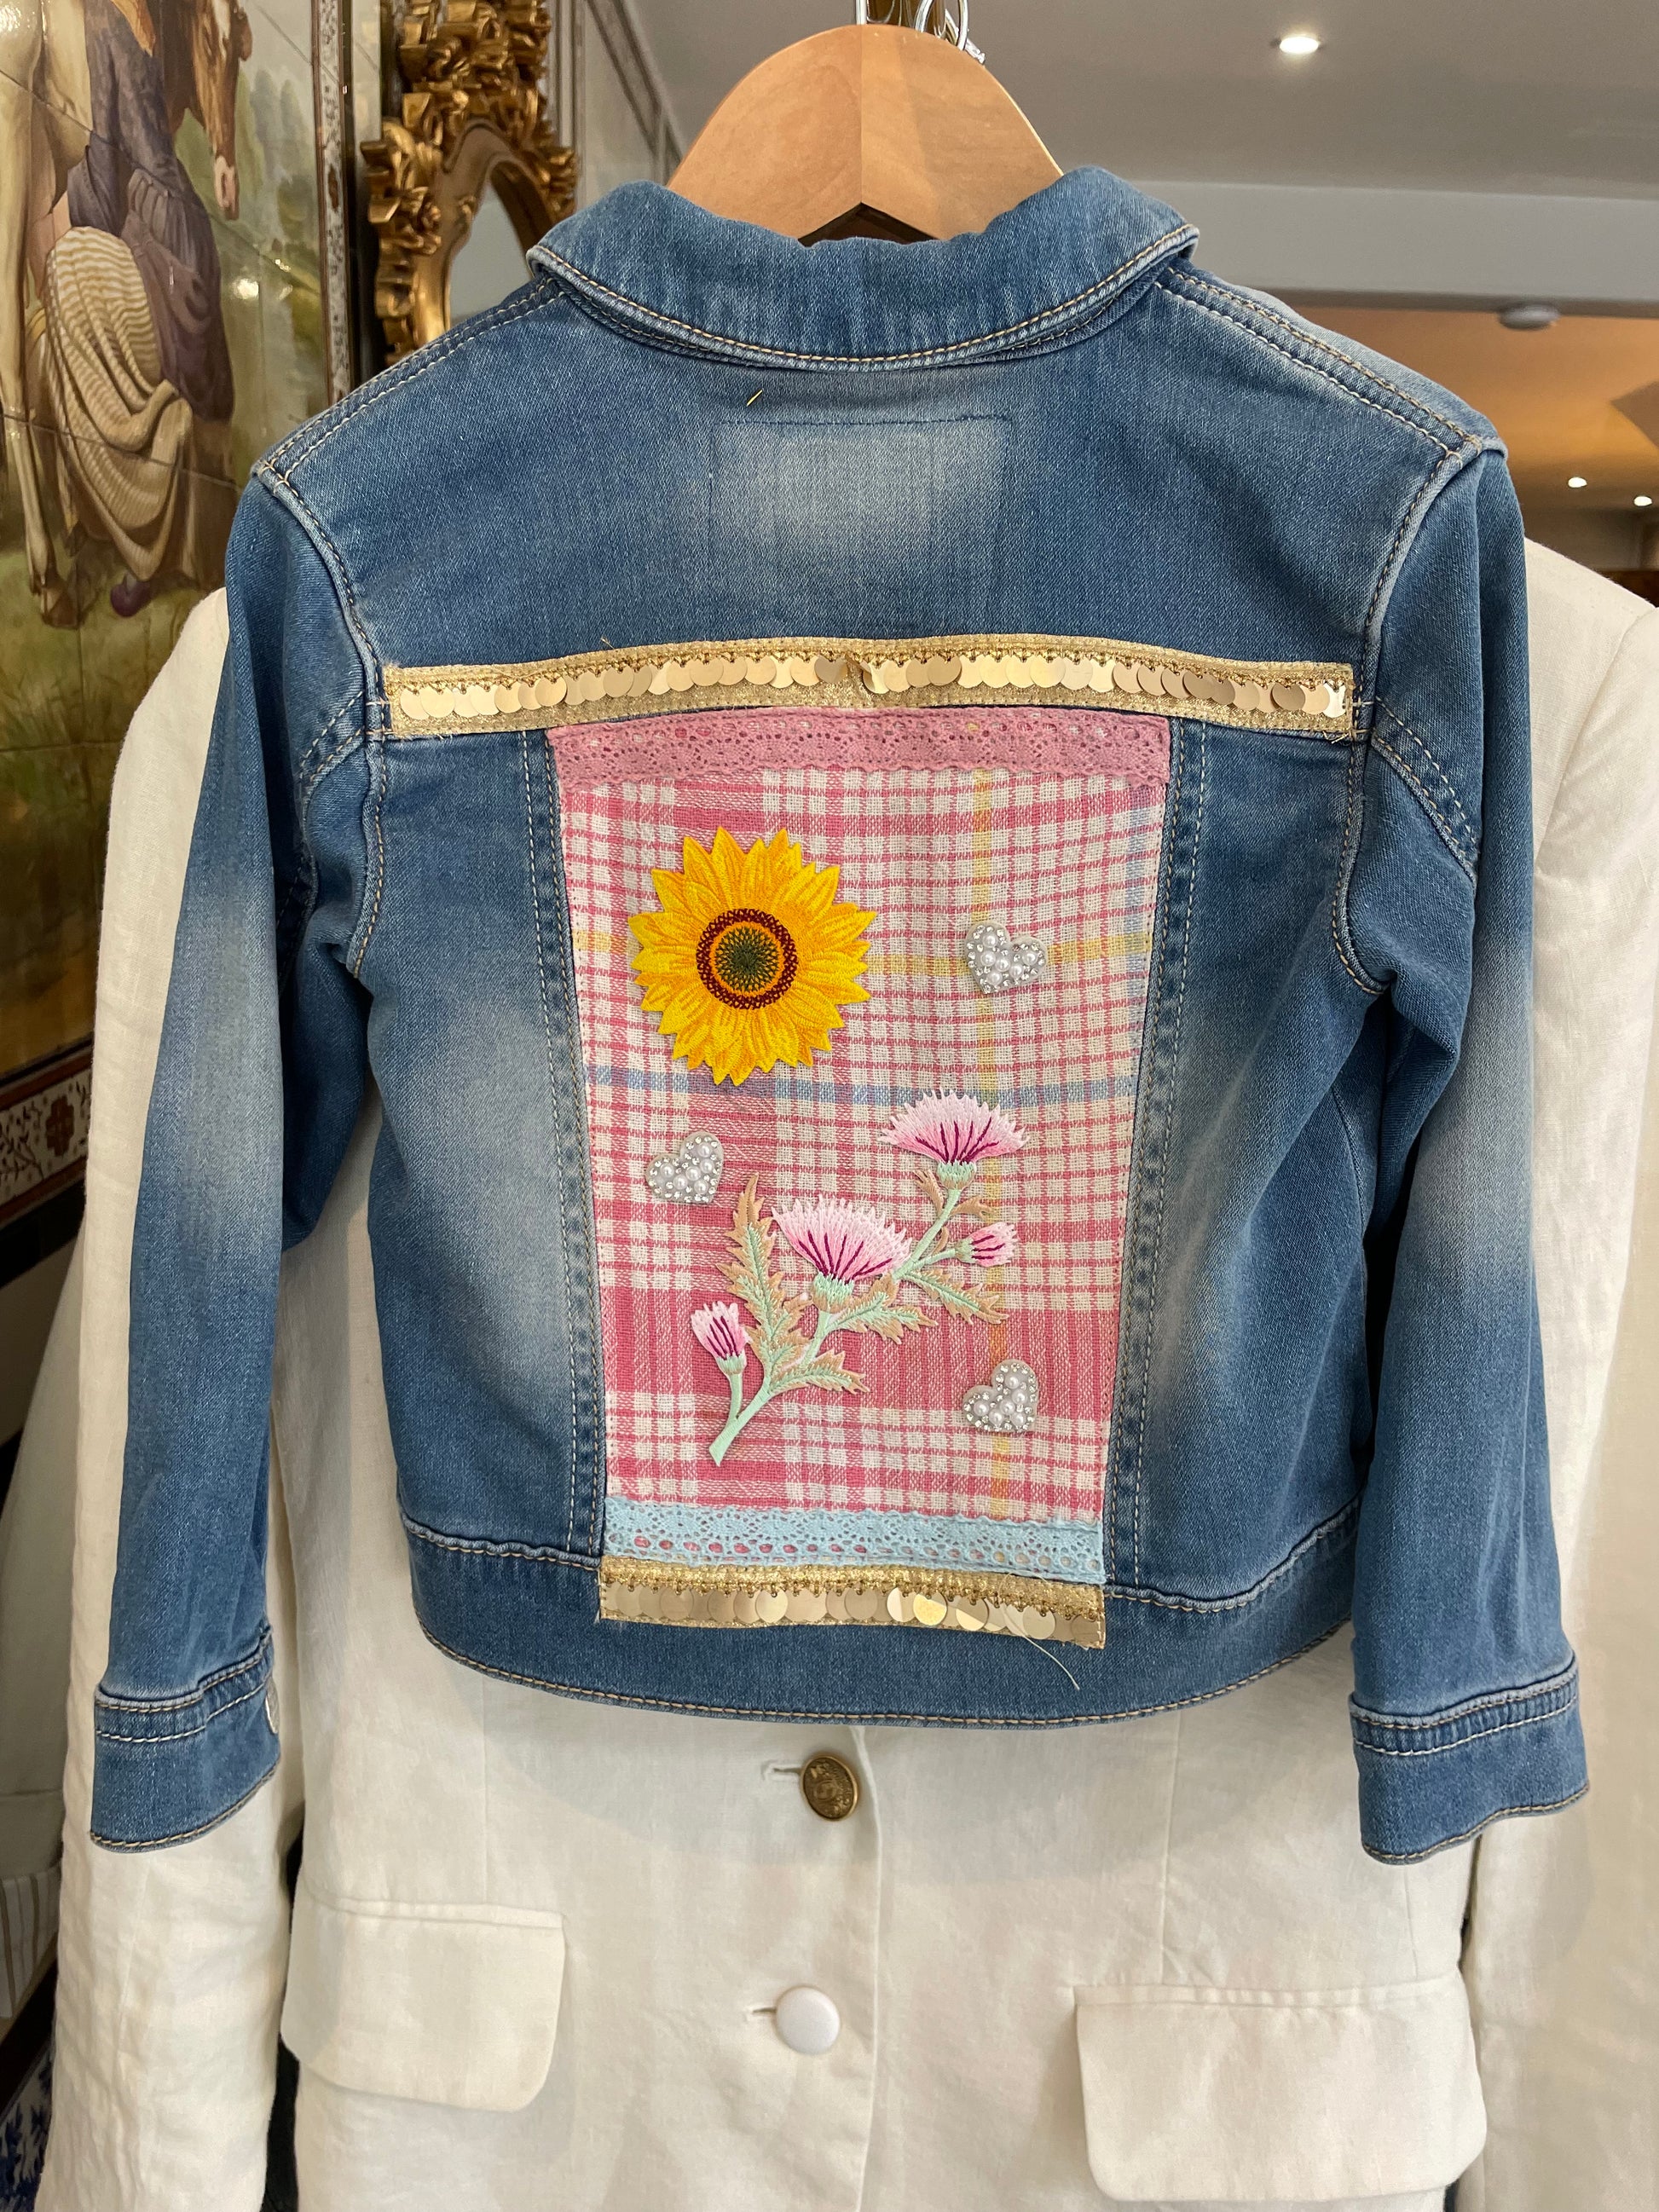 An Upcycled Children's Denim Jacket from mpira.